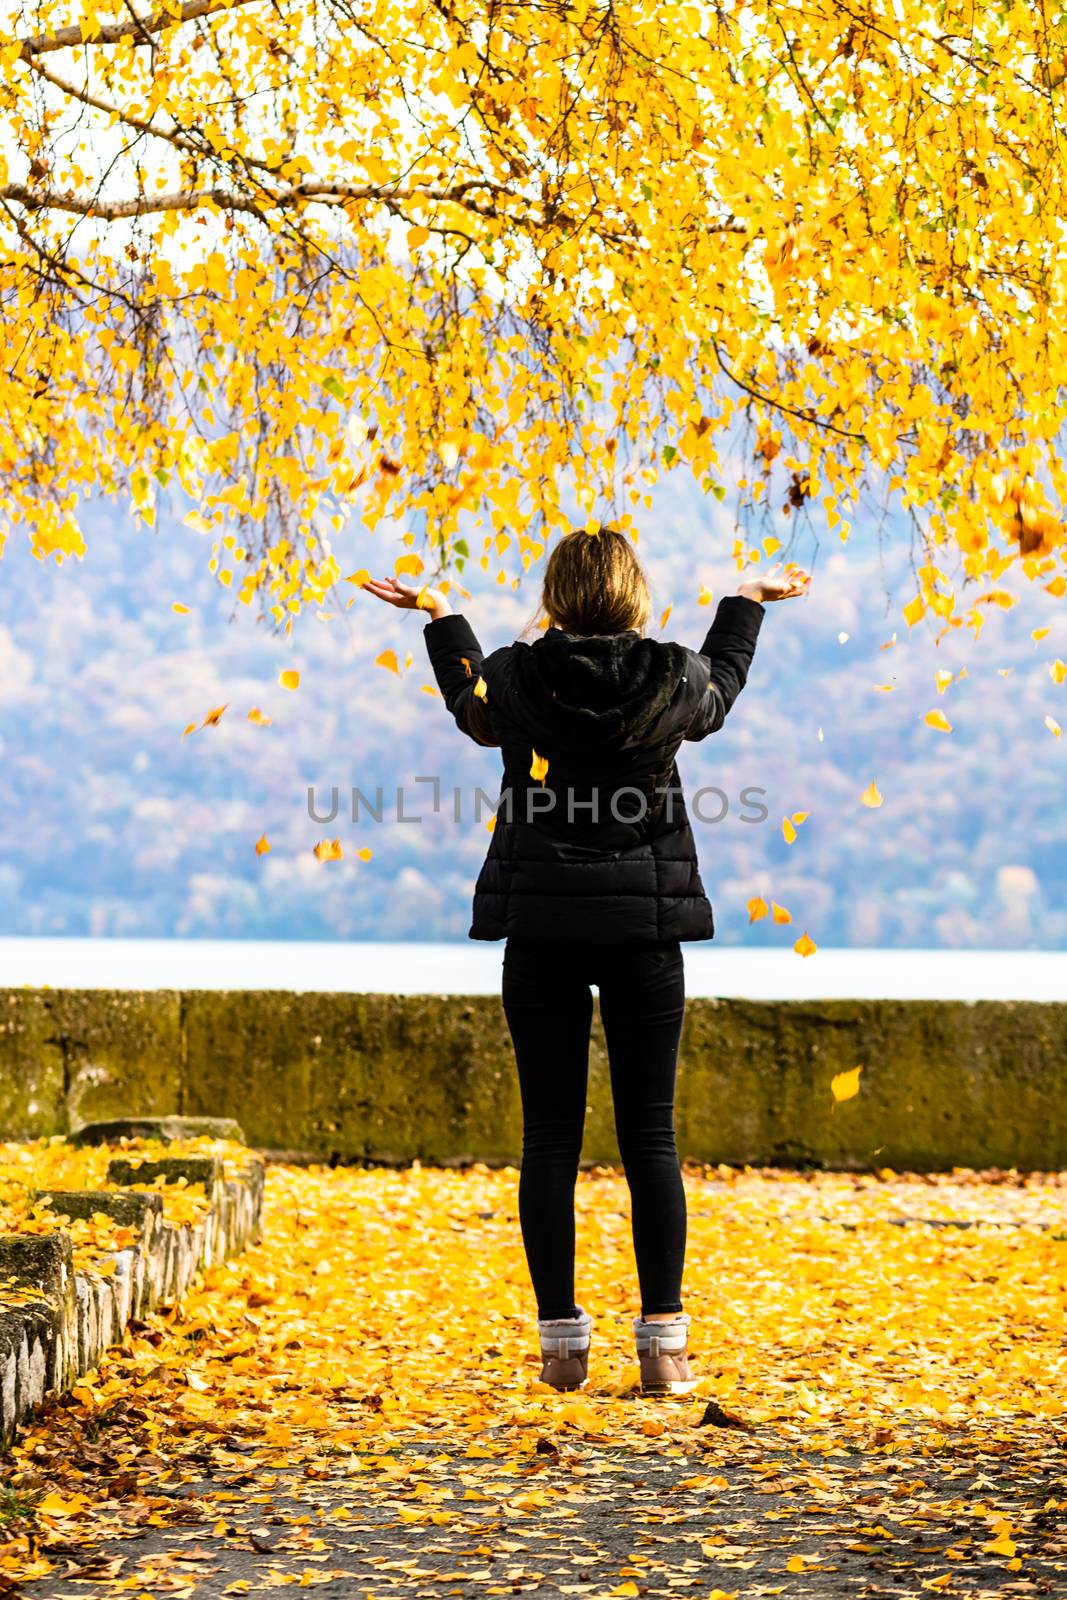 Back view of alone woman enjoying autumn, throwing fallen leaves on autumn alley. Autumn landscape, orange foliage in a park in Orsova, Romania, 2020